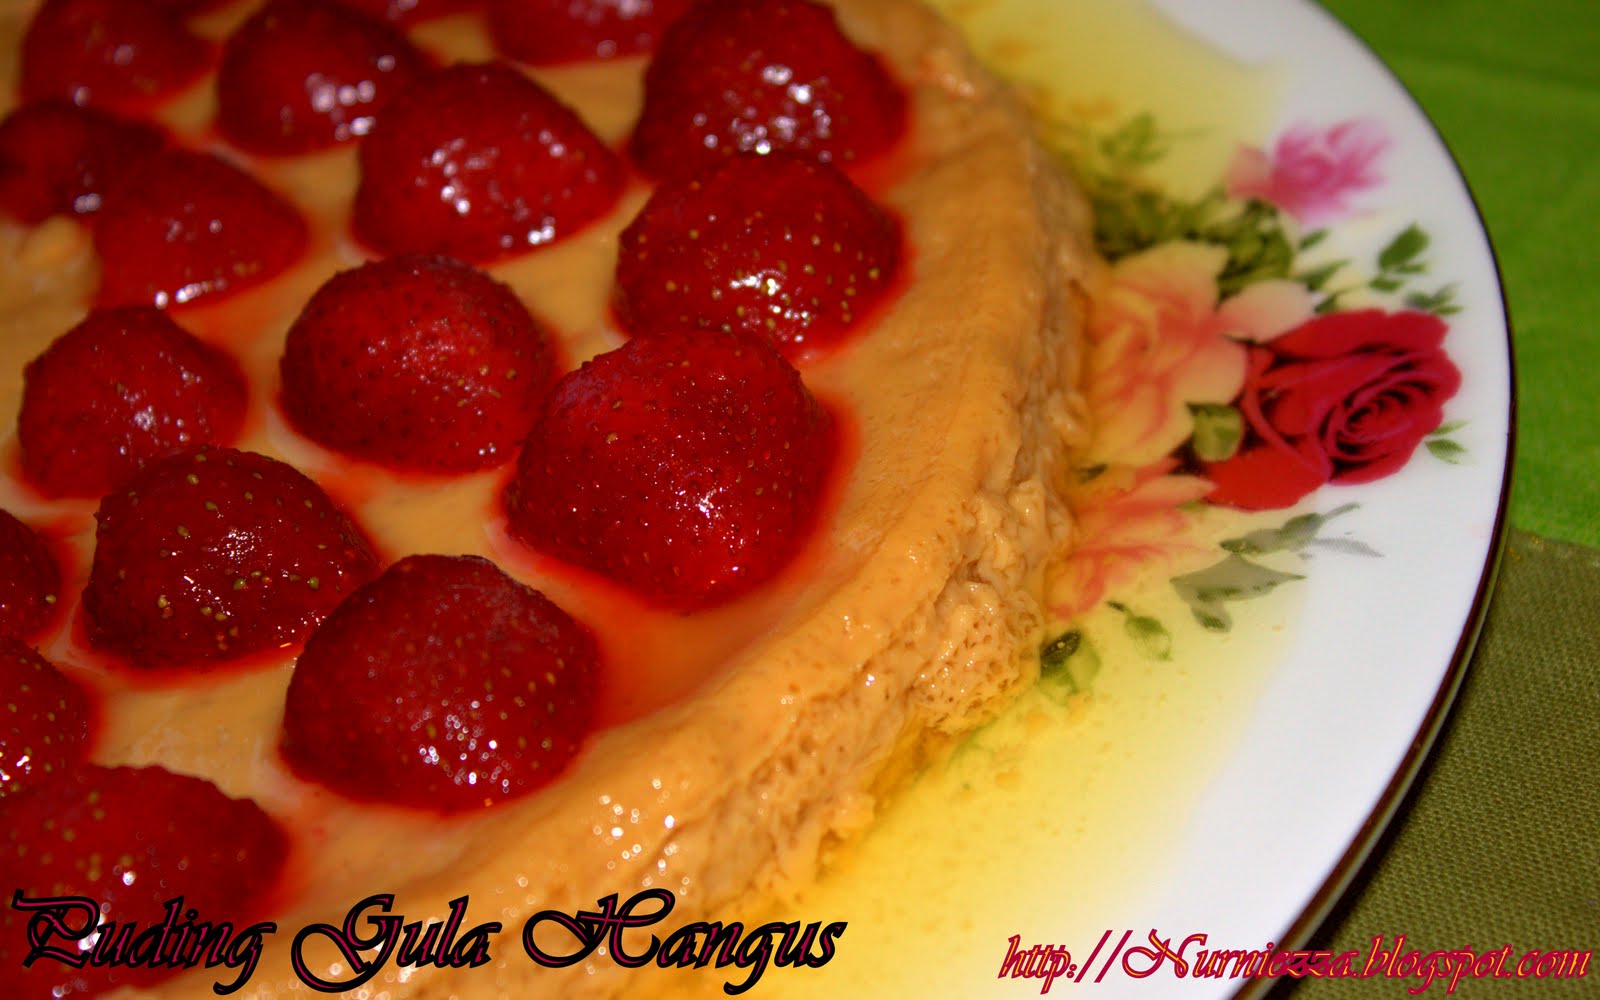 Our Journey Begins: Puding Gula Hangus